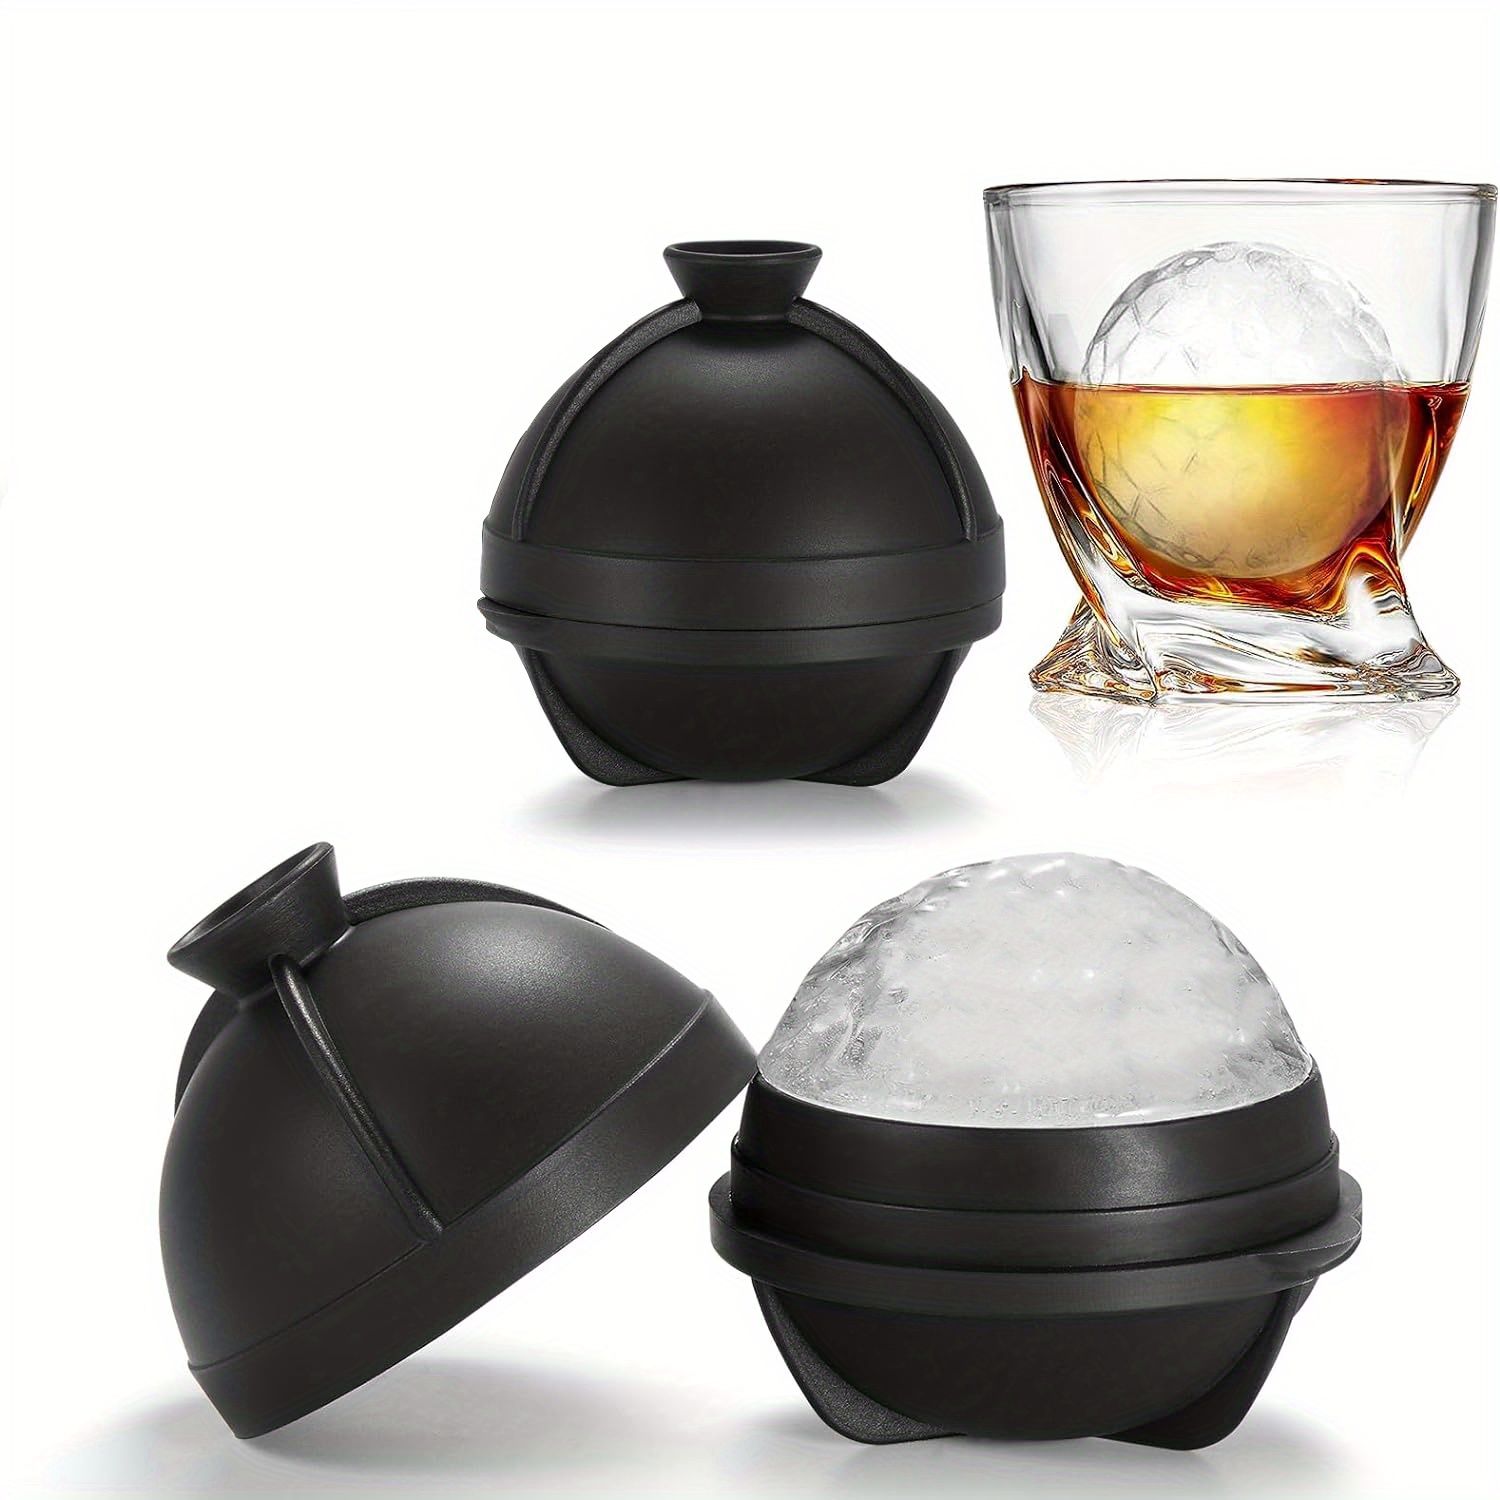 2.5 inch Large Globe Ice Cube Mold,2pcs Sphere Ice Cube Mold,Ice Ball Mold  - Great for Whiskey and Scotch